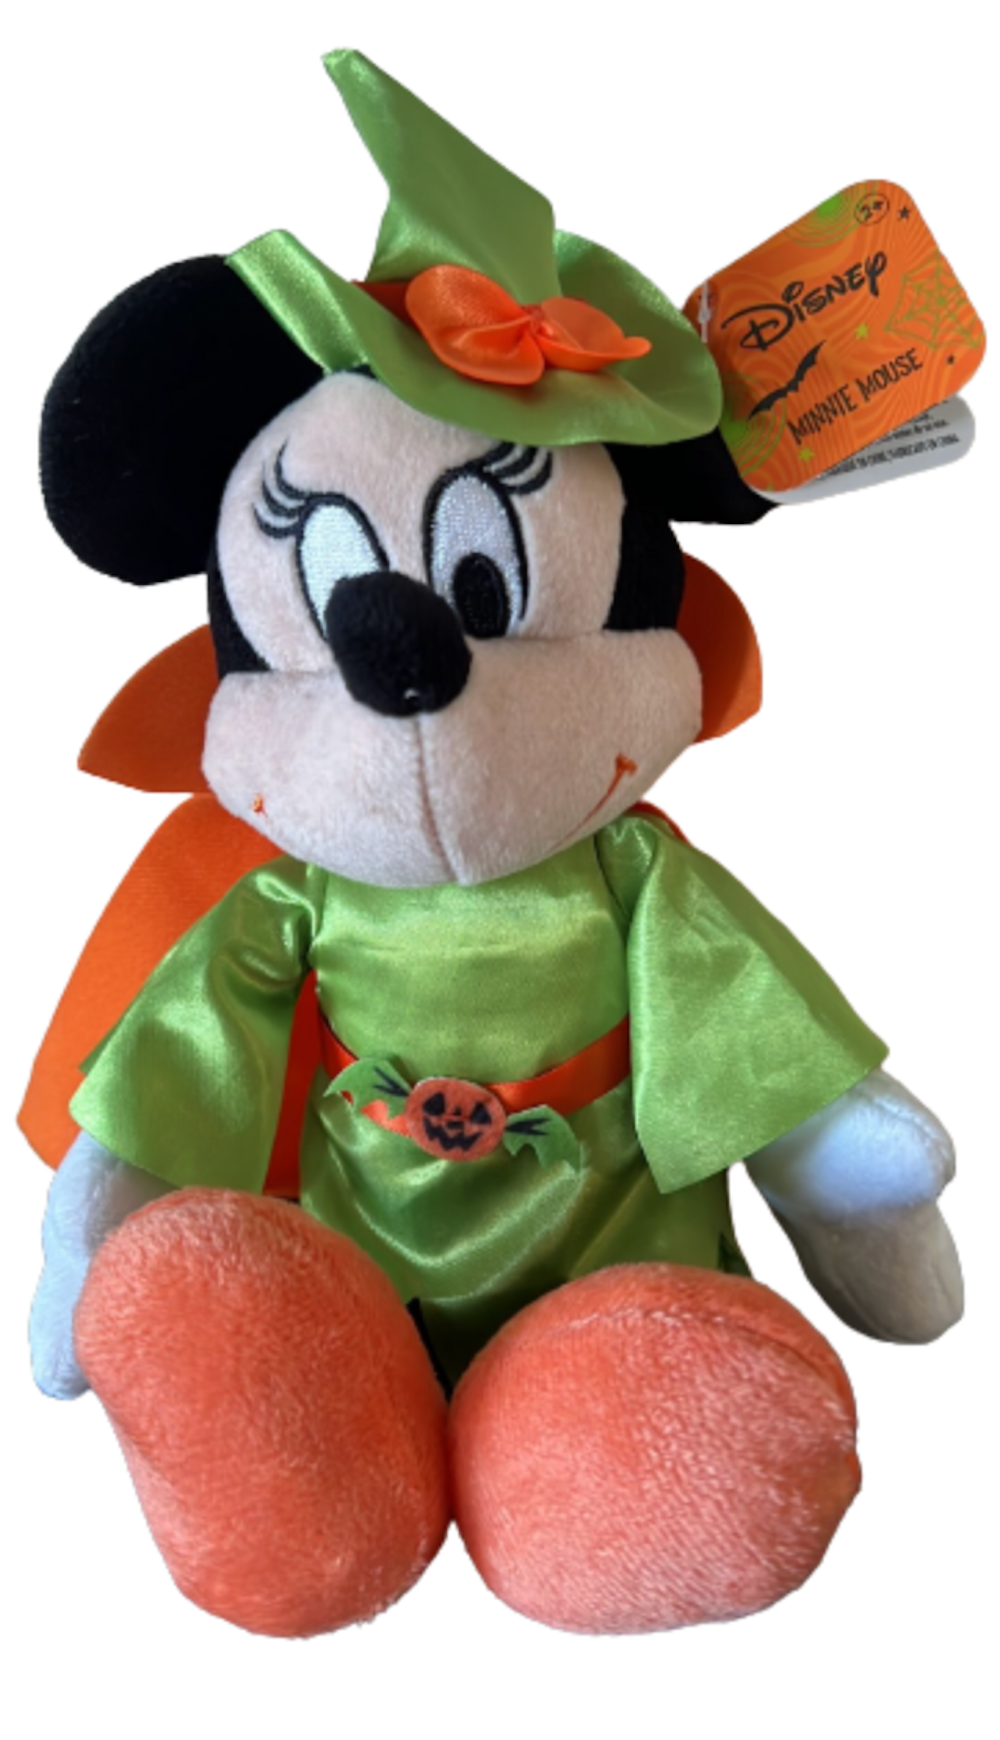 Disney Halloween Minnie with Witch Costume Plush New with Tags